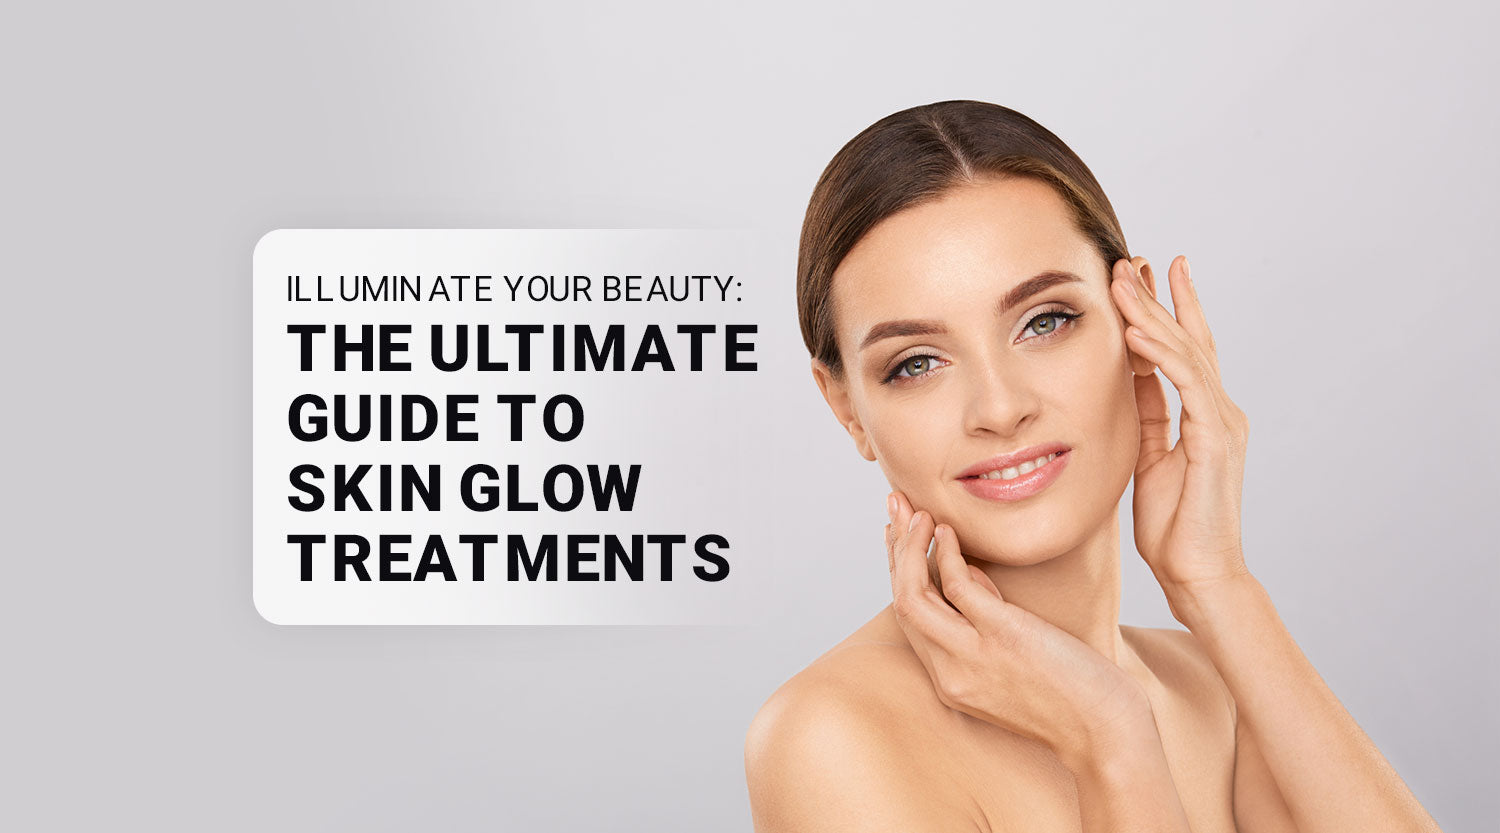 Illuminate Your Beauty: The Ultimate Guide to Skin Glow Treatments